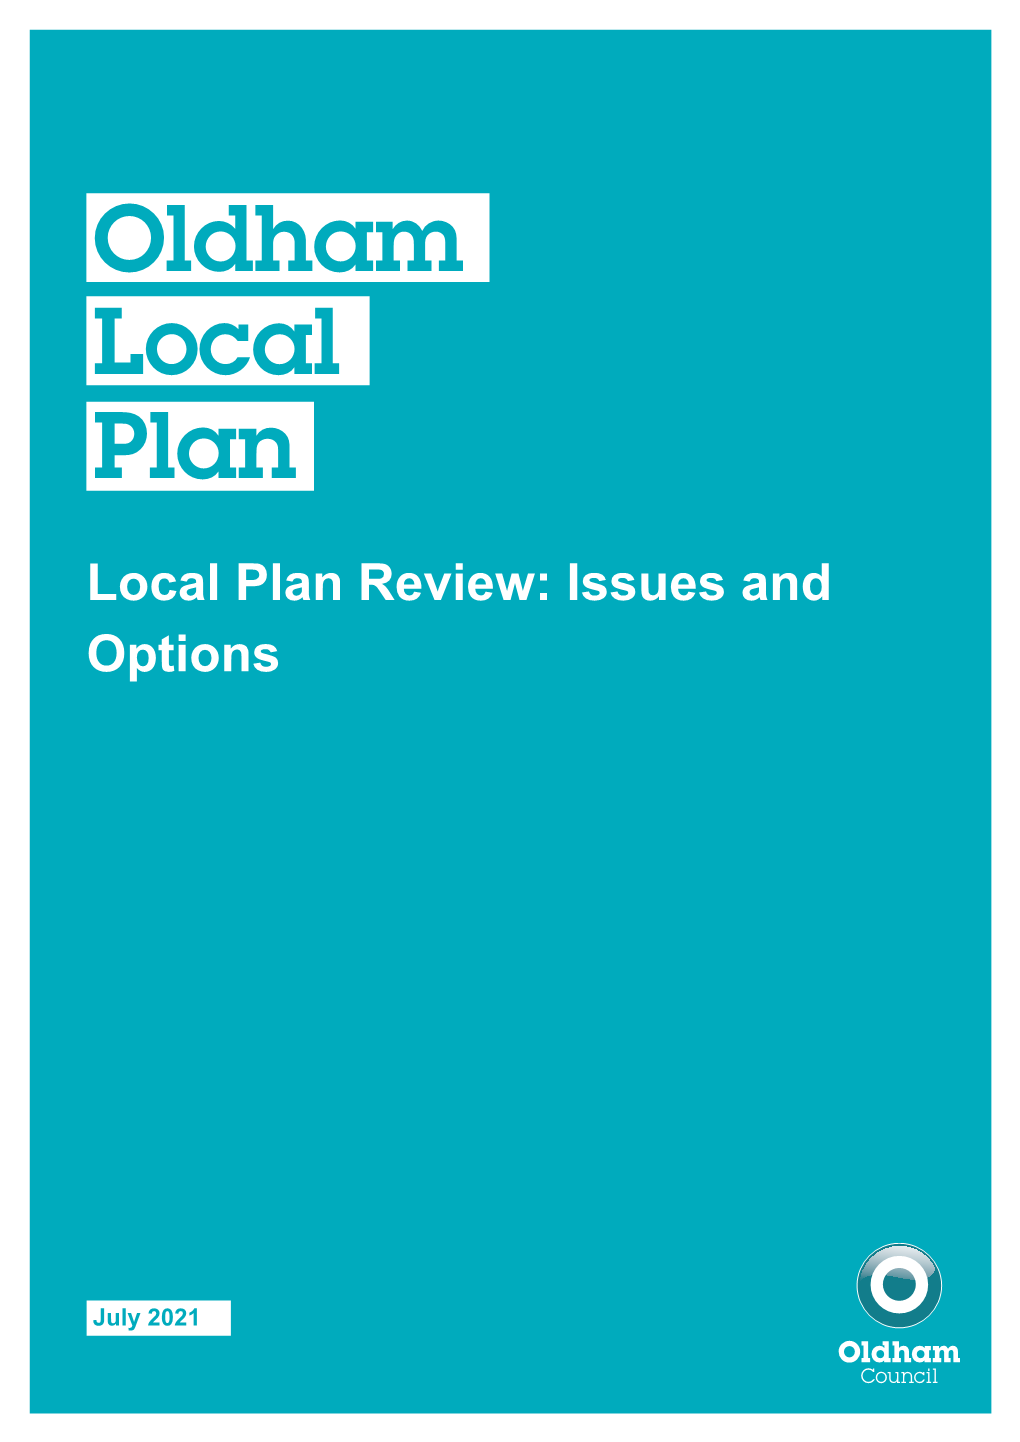 Oldham Local Plan Review: Issues and Options